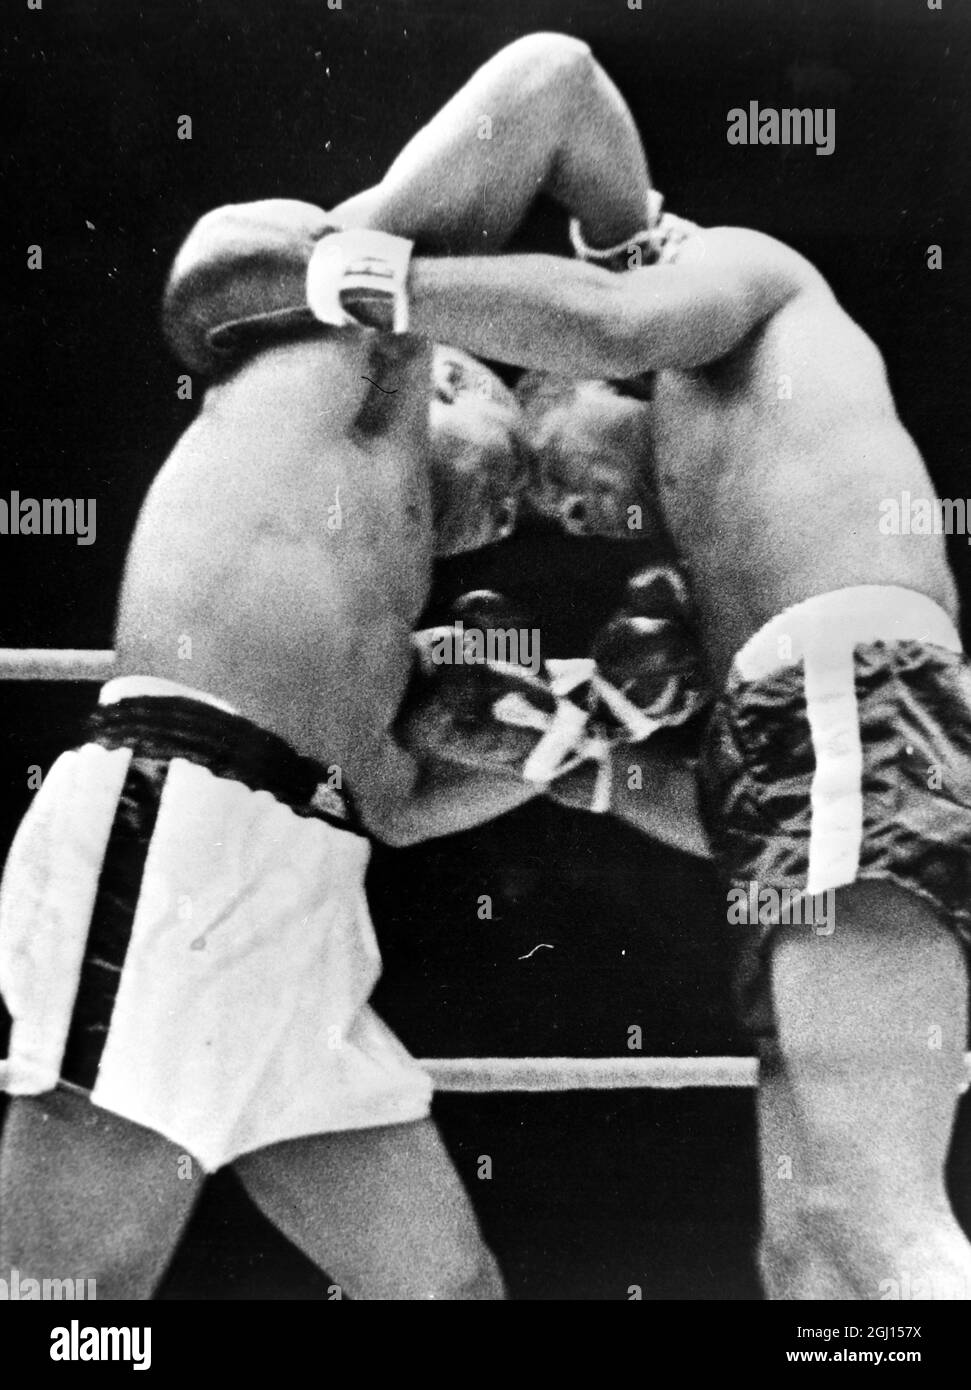 BOXER SONNY LISTON AND FLOYD PATTERSON IN ACTION - ; 27 SEPTEMBER 1962 Stock Photo